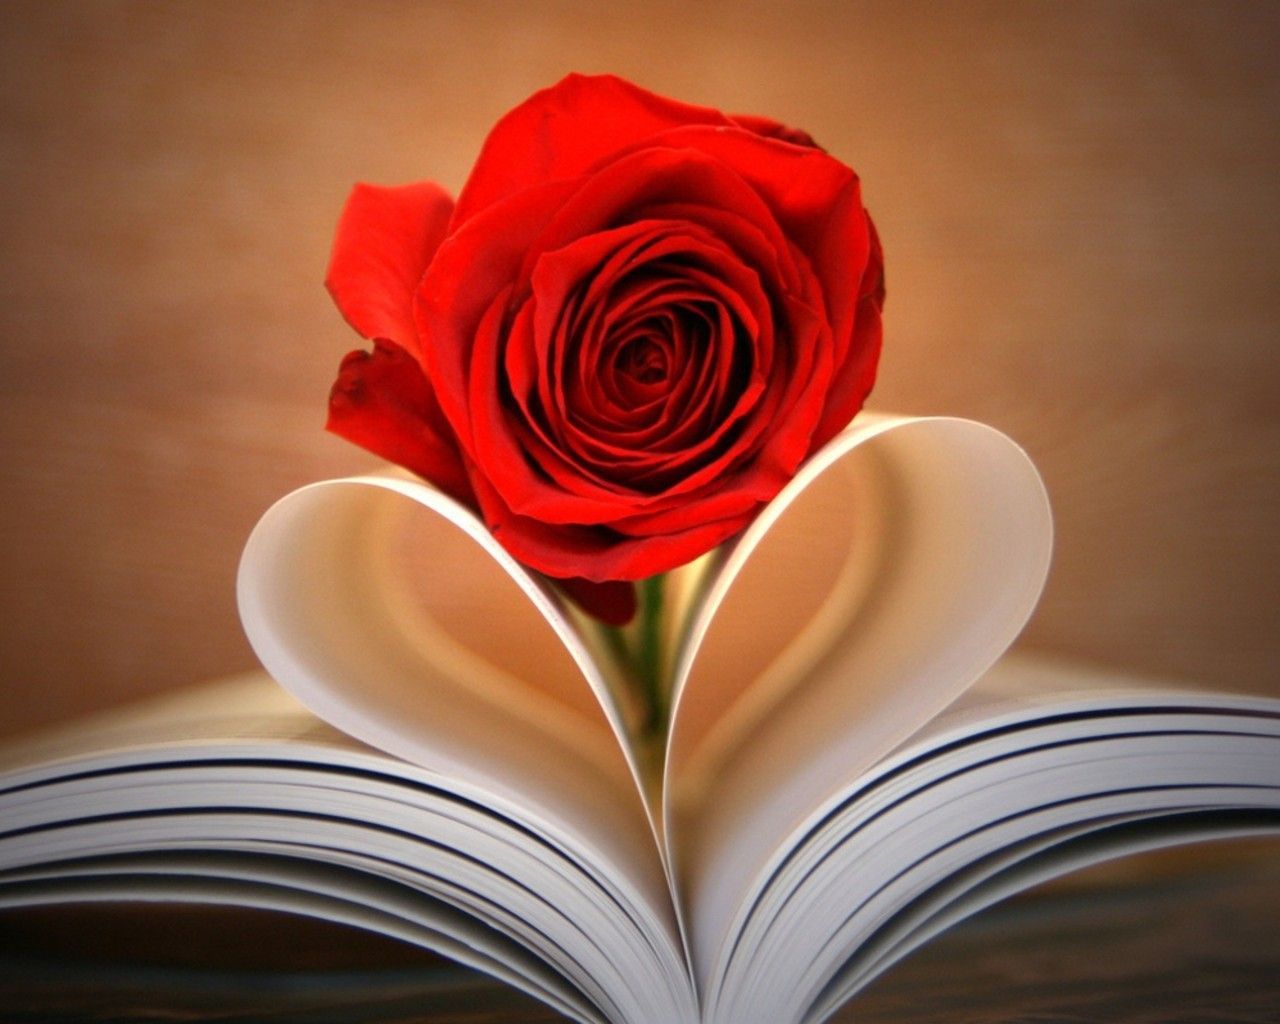 roses and books. Rose Book Heart. Love rose